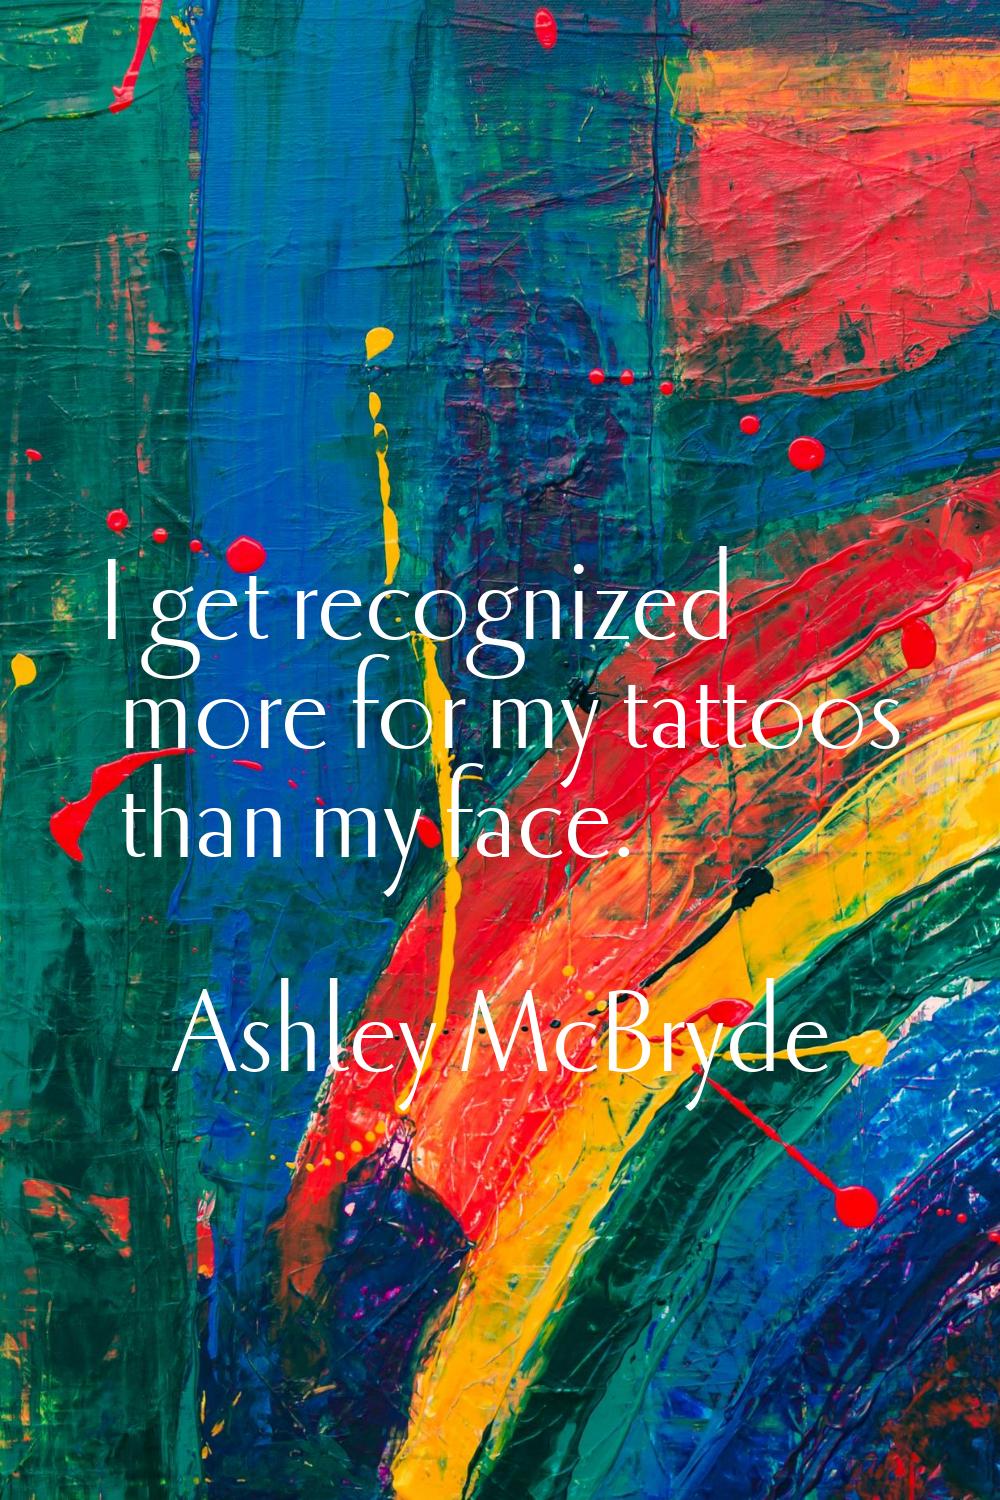 I get recognized more for my tattoos than my face.